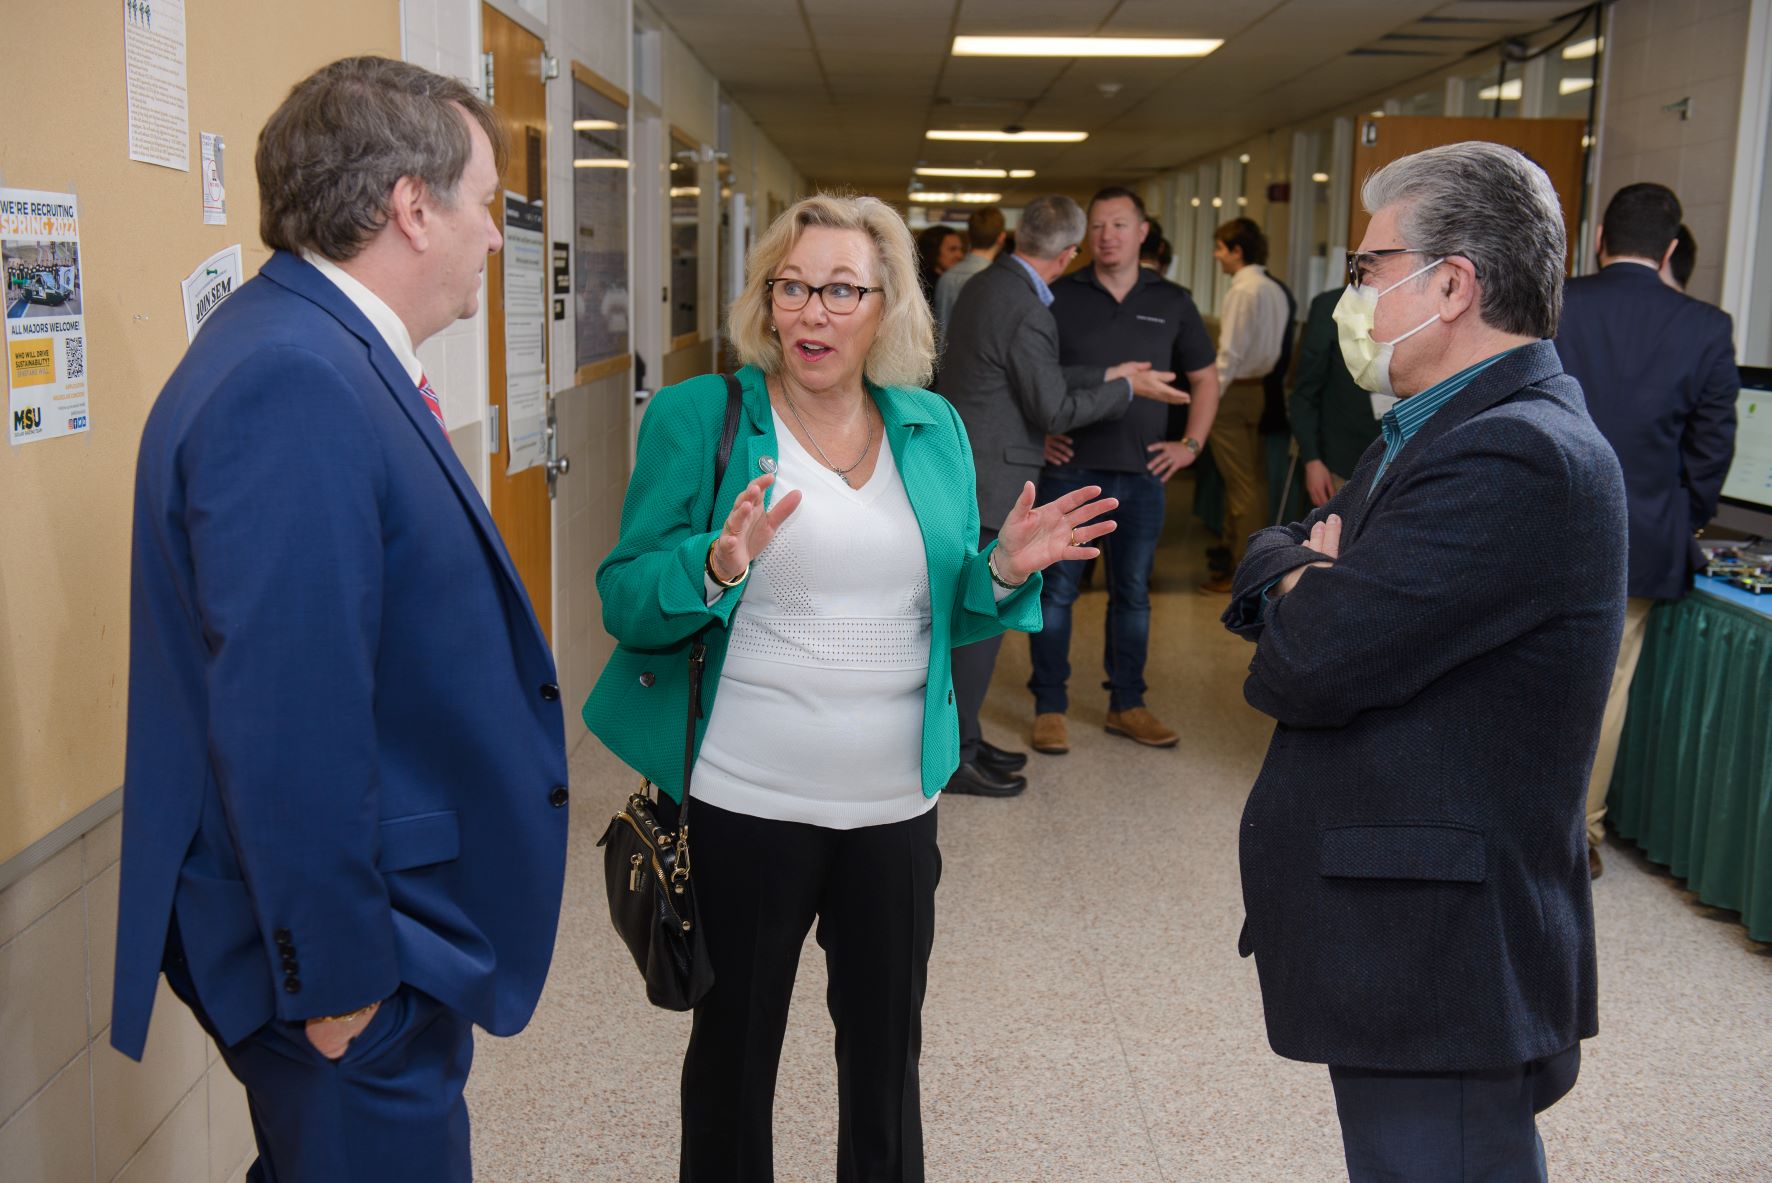 Melanie Foster, Dean Kempel and Abdol Esfahanian, Chair of CSE, talk about Design Day events